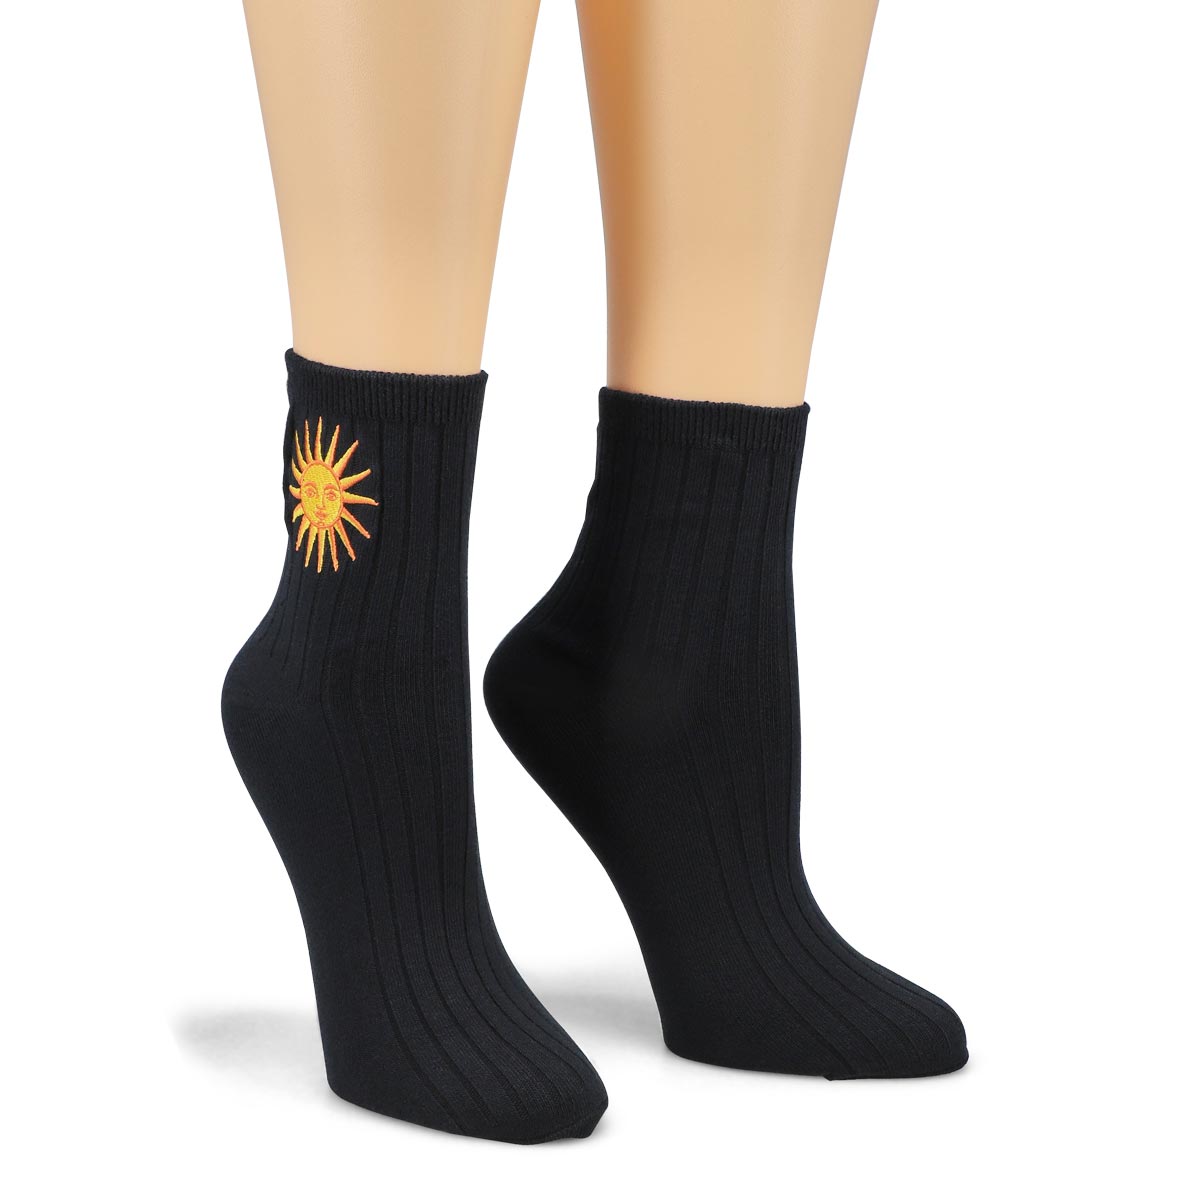 Chaussettes EMBROIDERED SUN, femmes